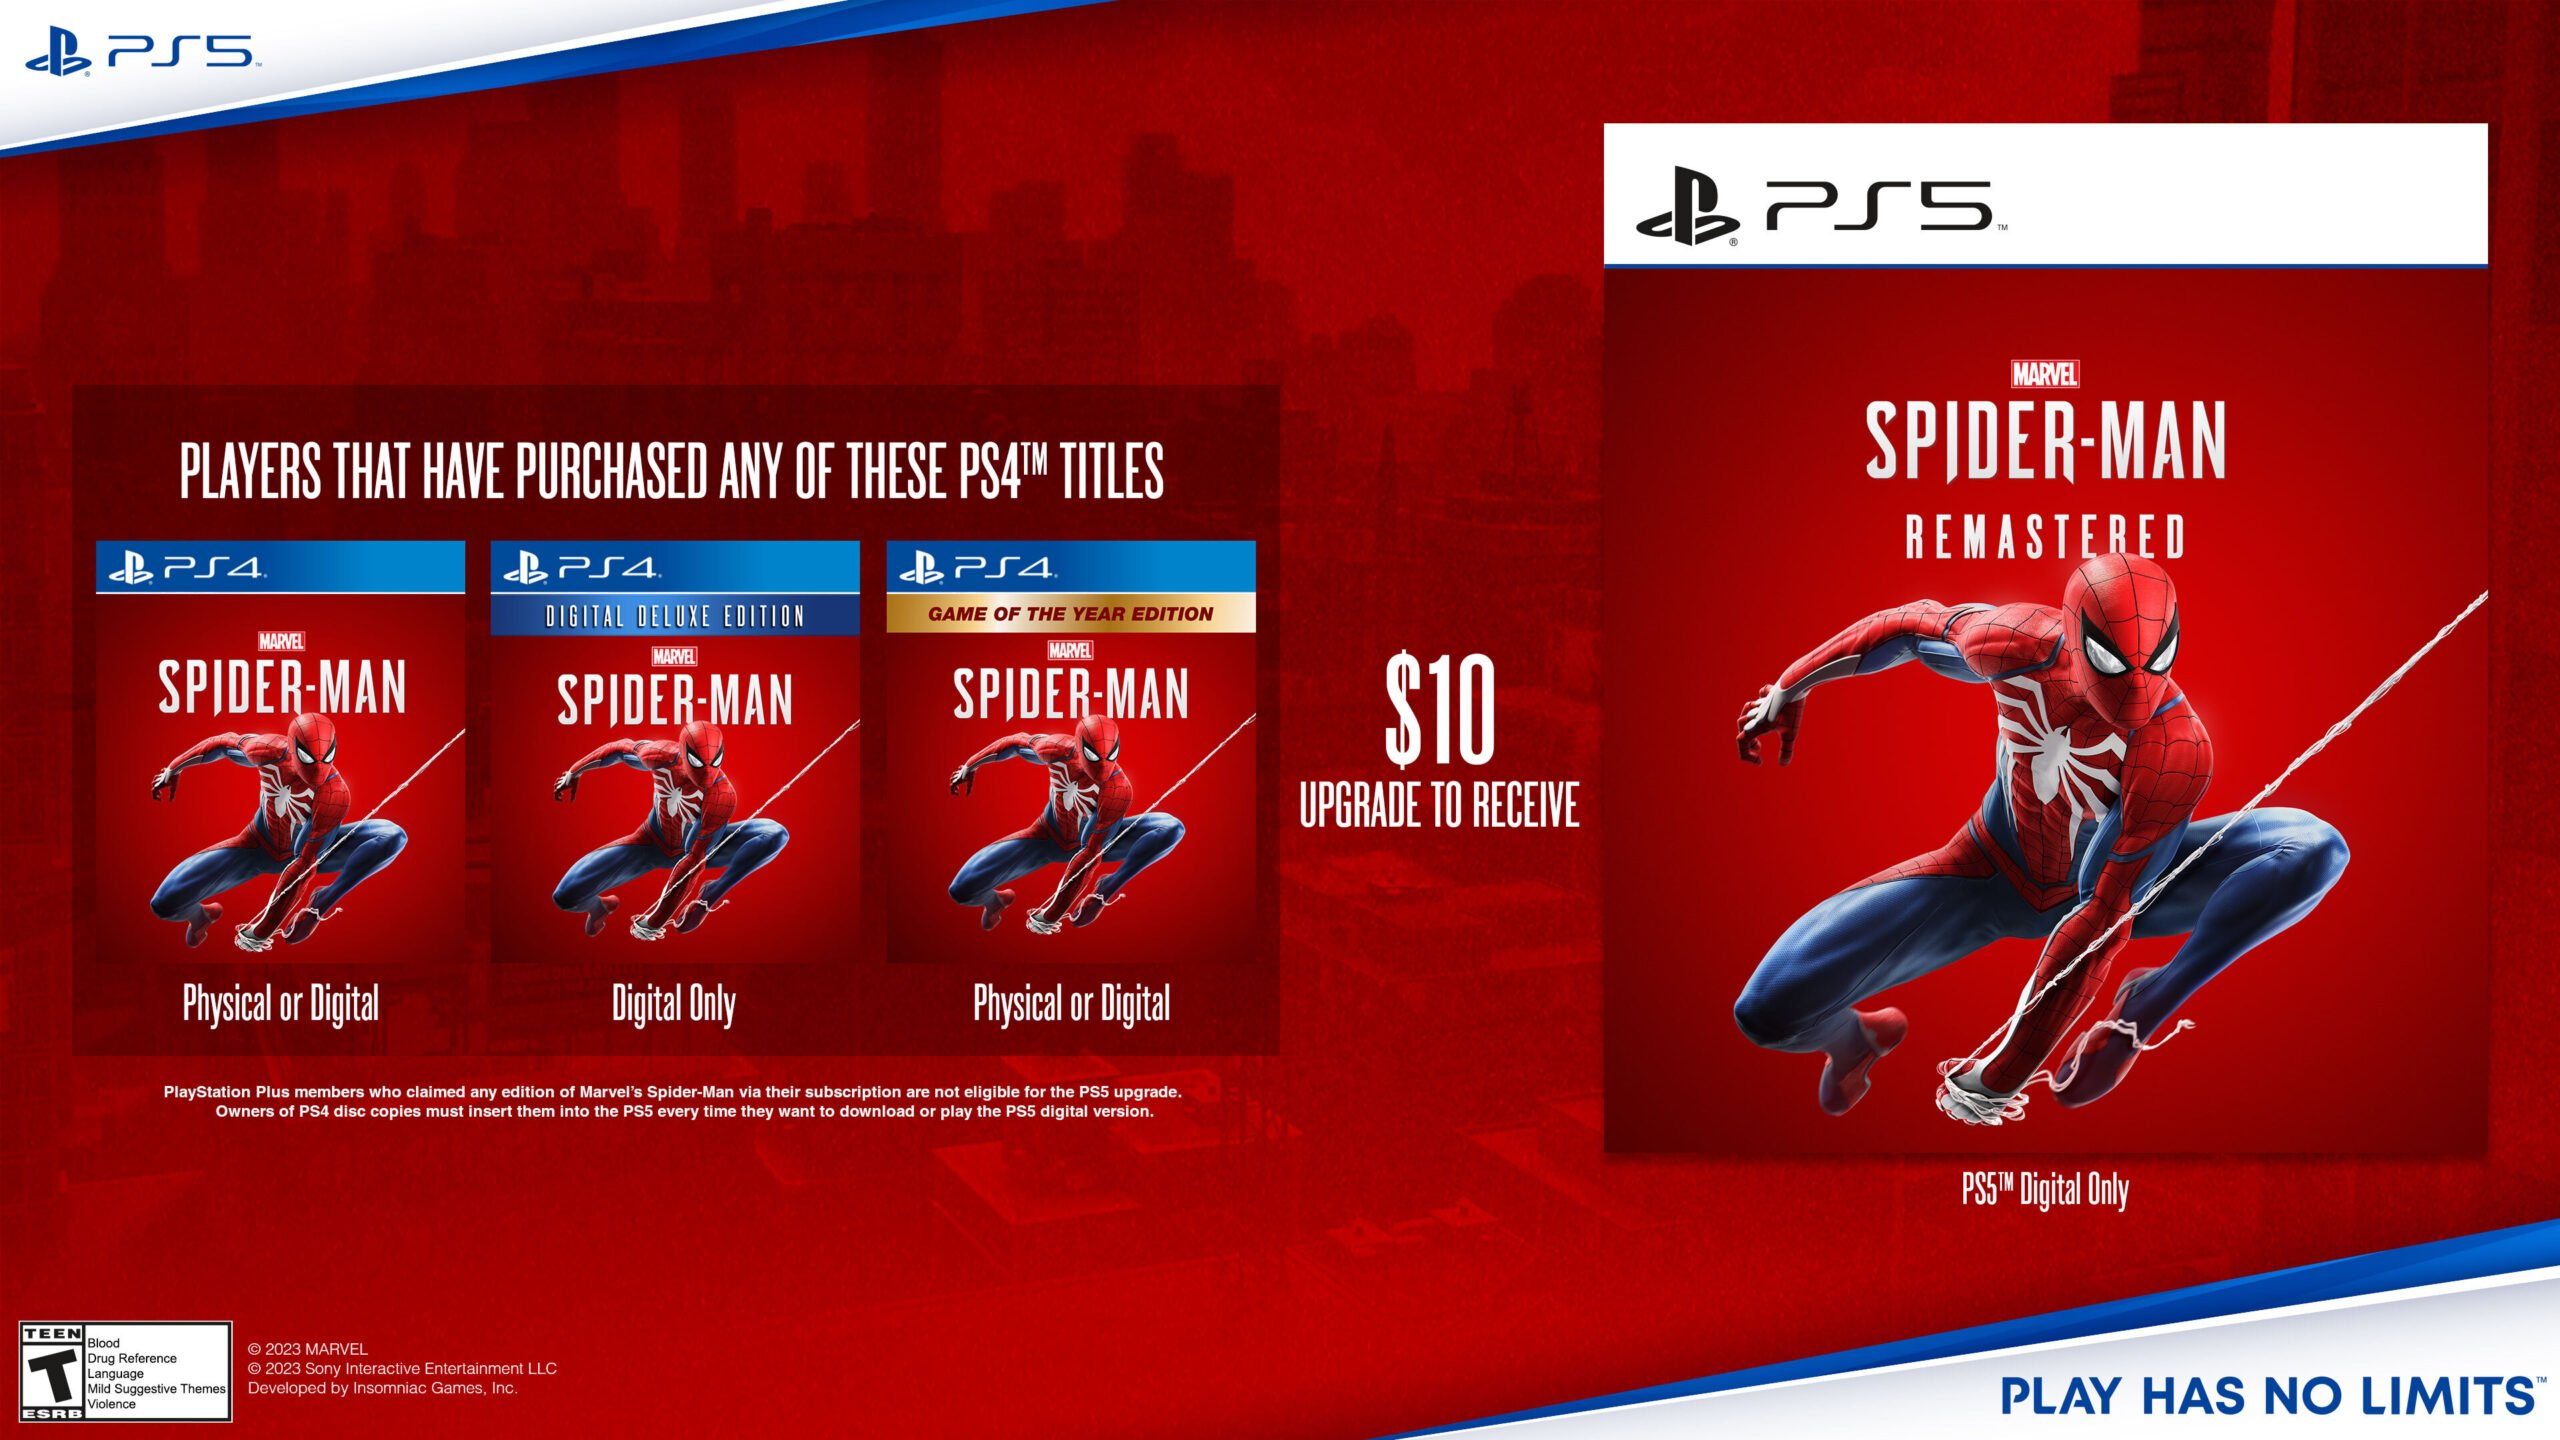 Marvel's Spider-Man Remastered gets standalone PS5 release later